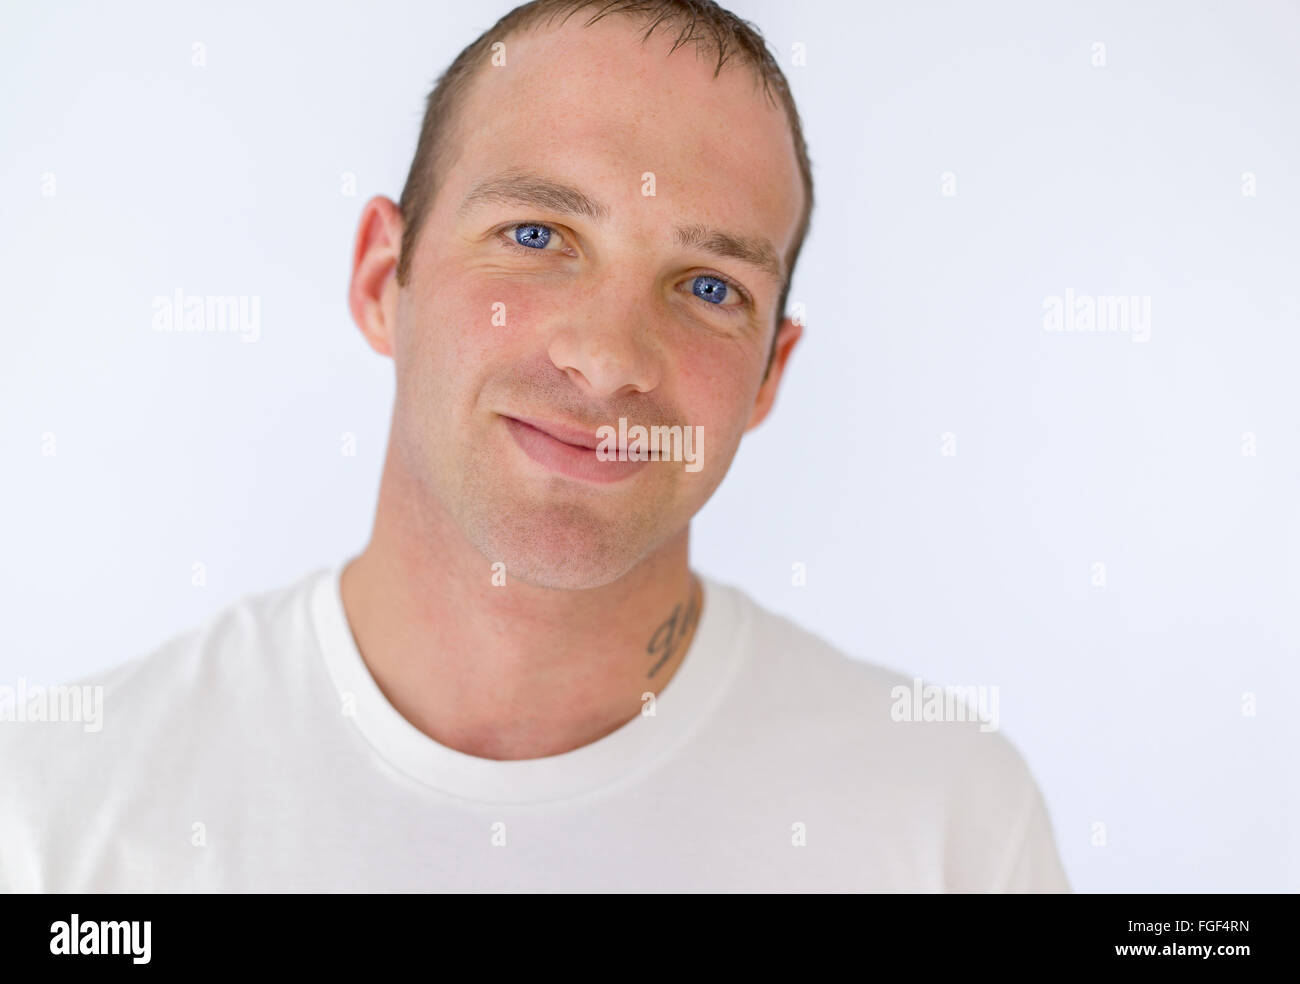 Portrait of a man wearing a white t-shirt smiling Stock Photo